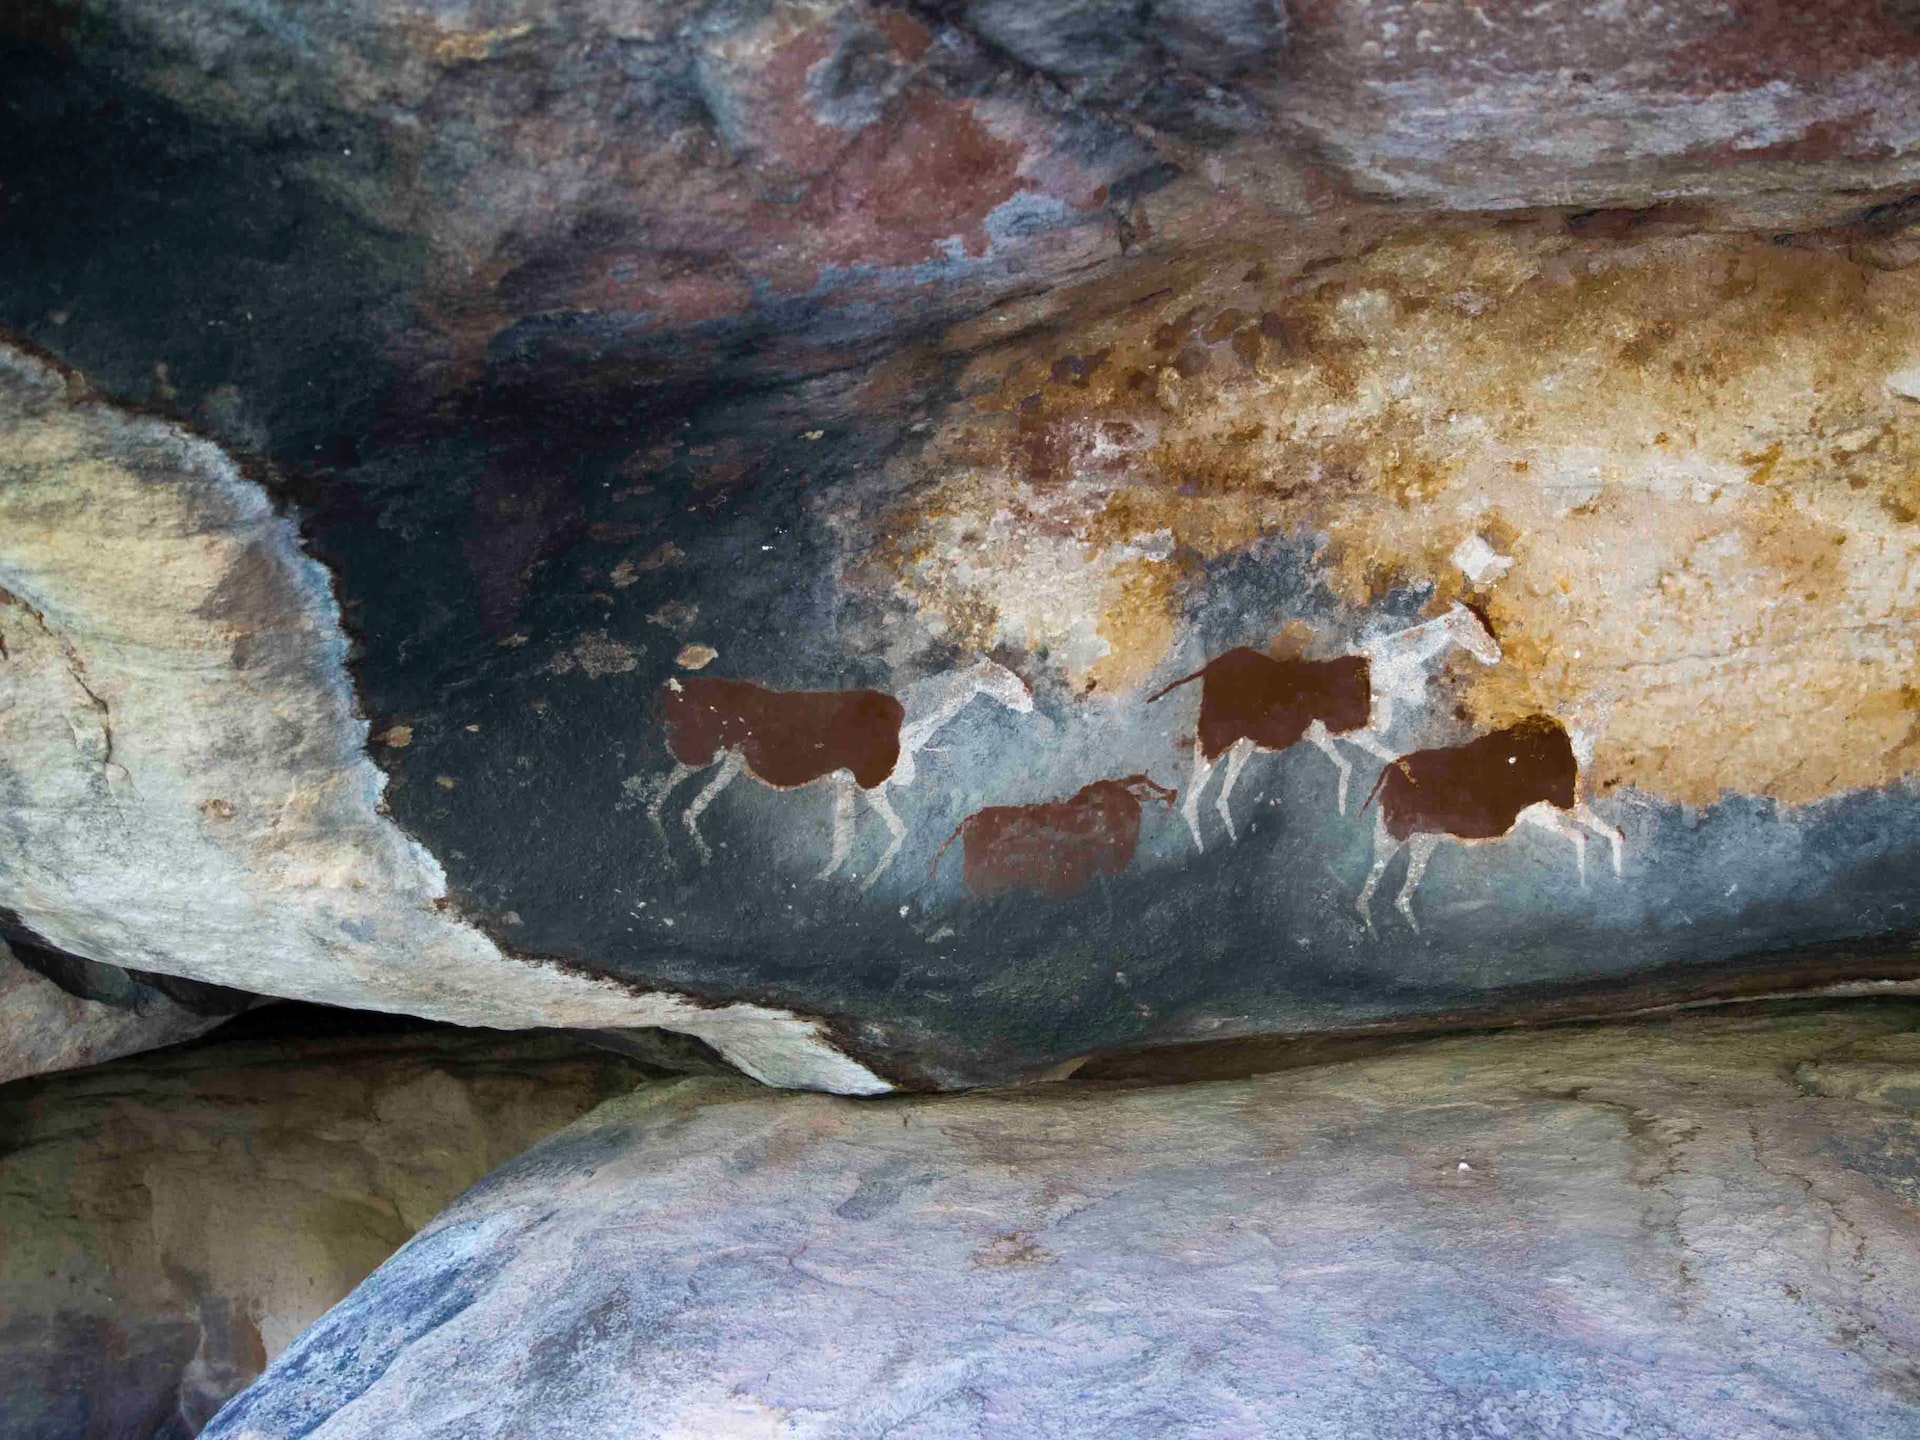 Photograph of ancient cave drawings.